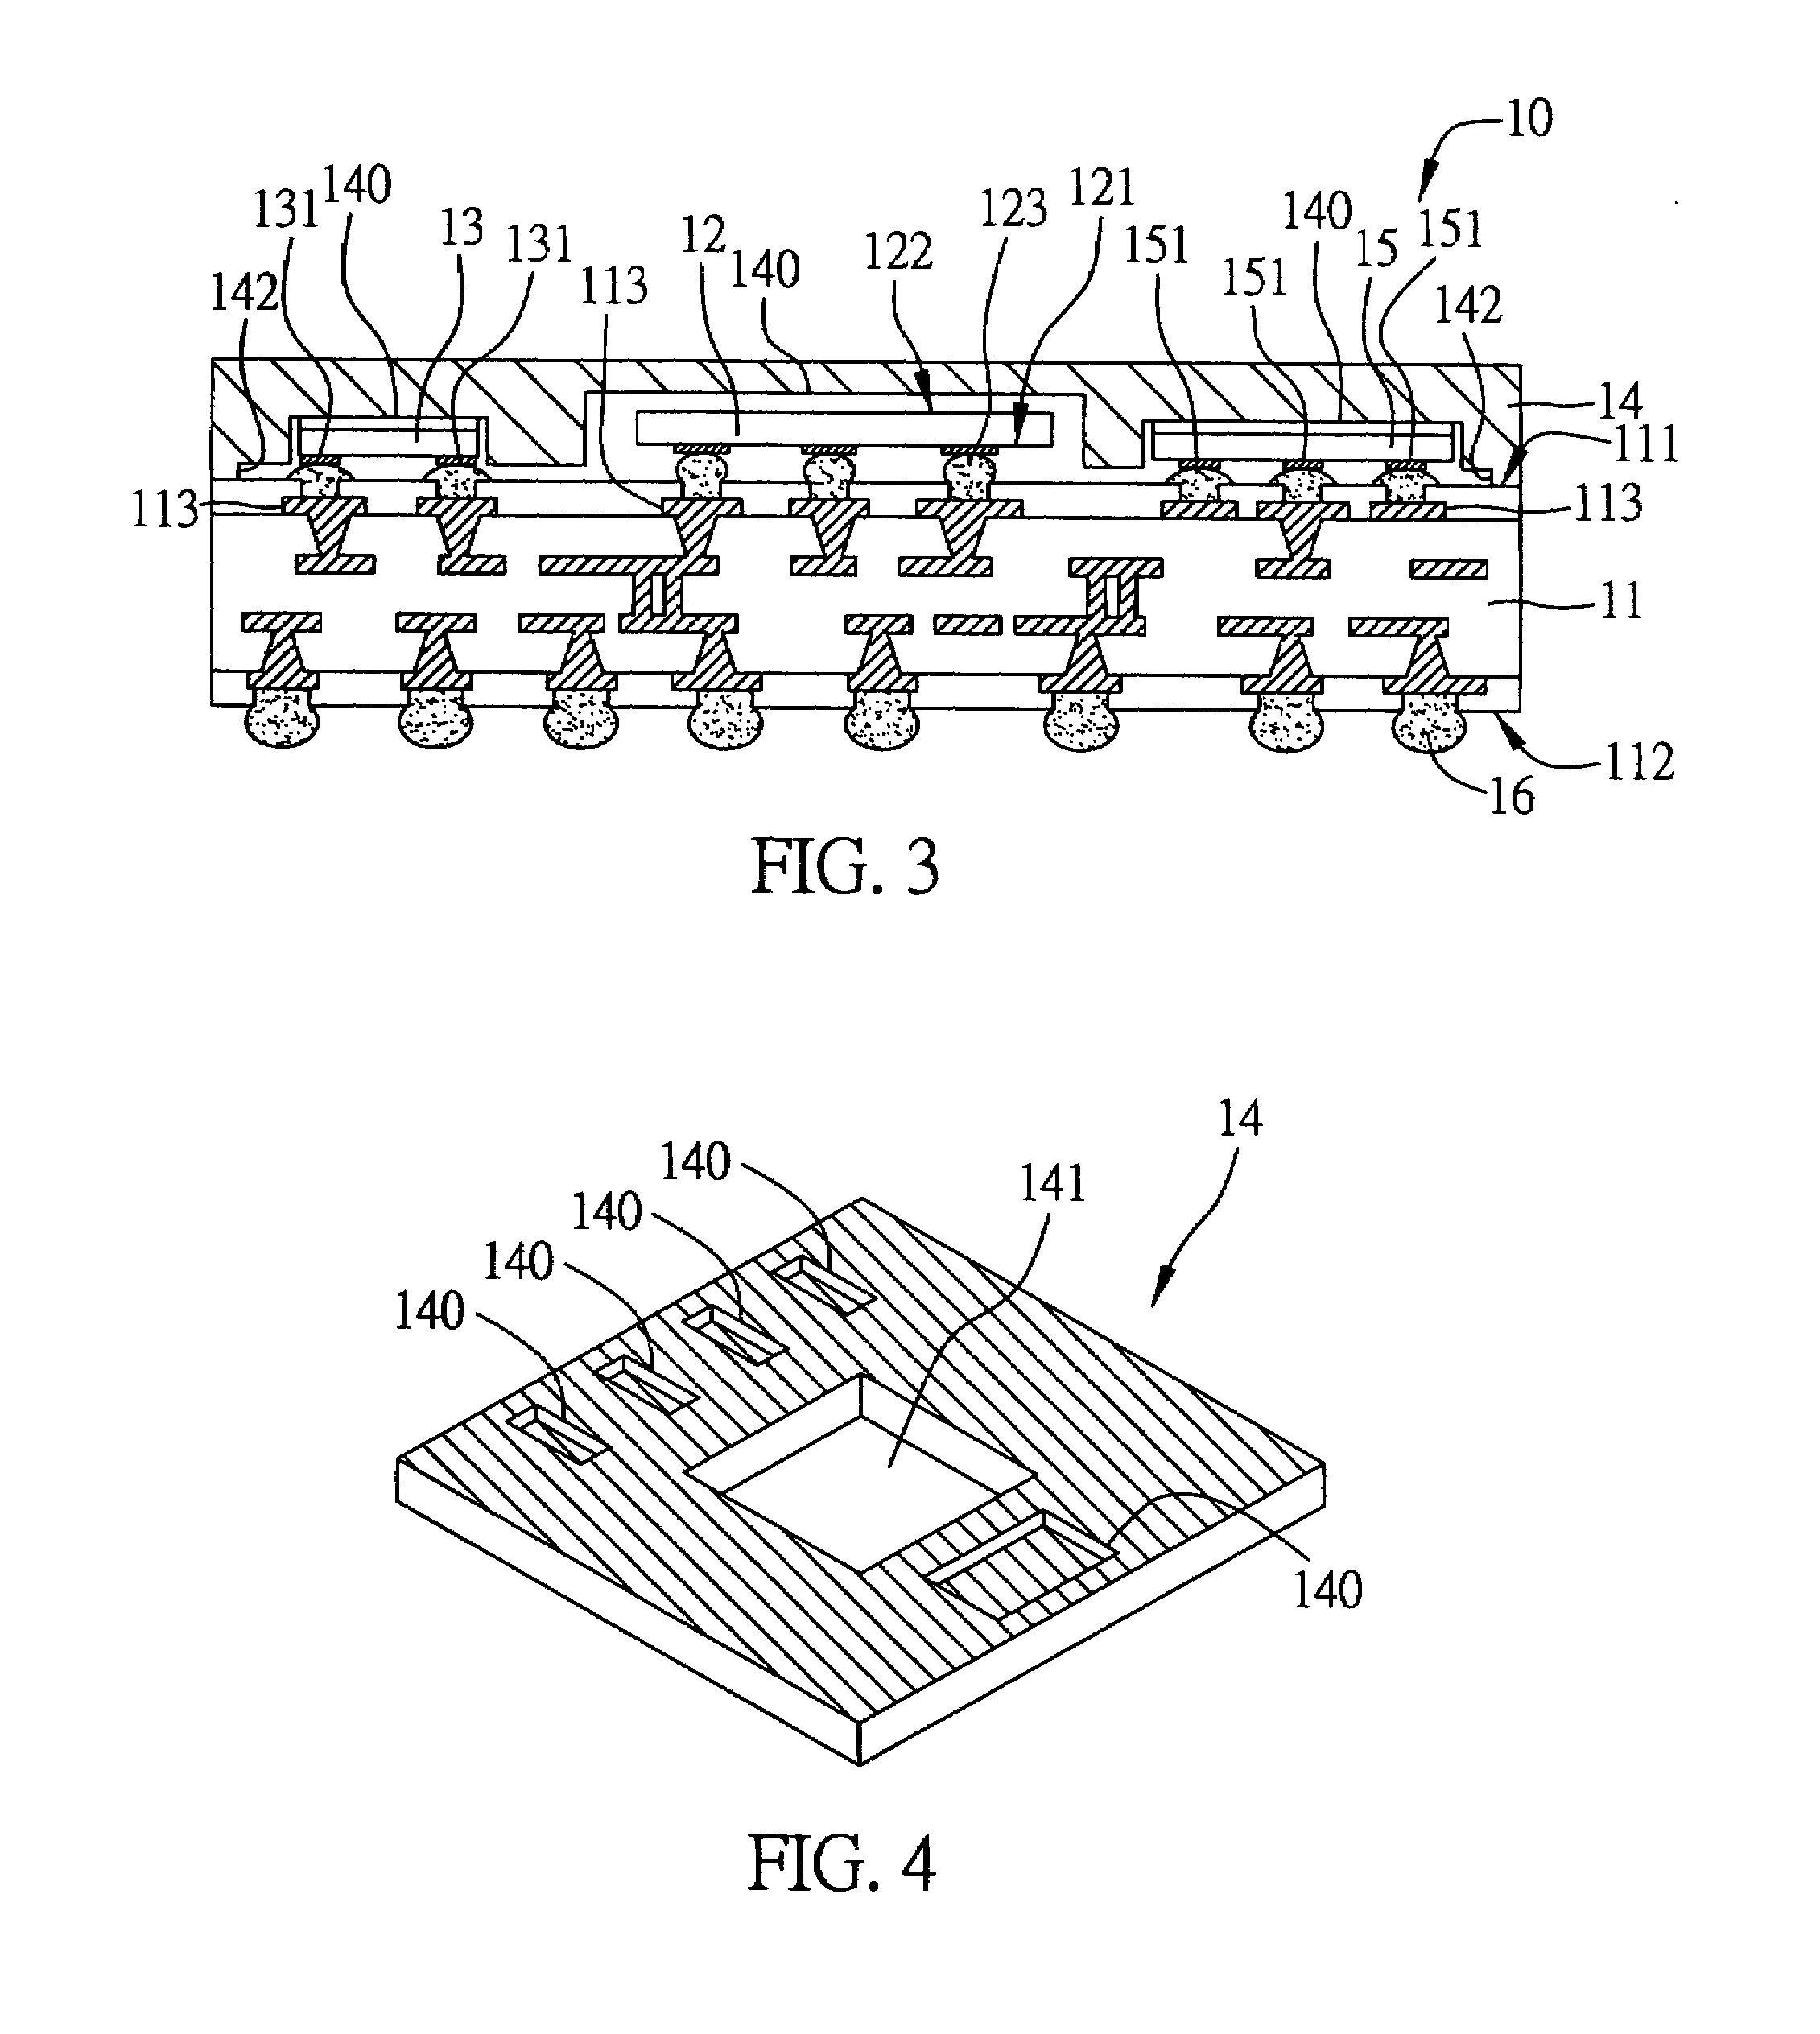 Heat sink structure with embedded electronic components for semiconductor package